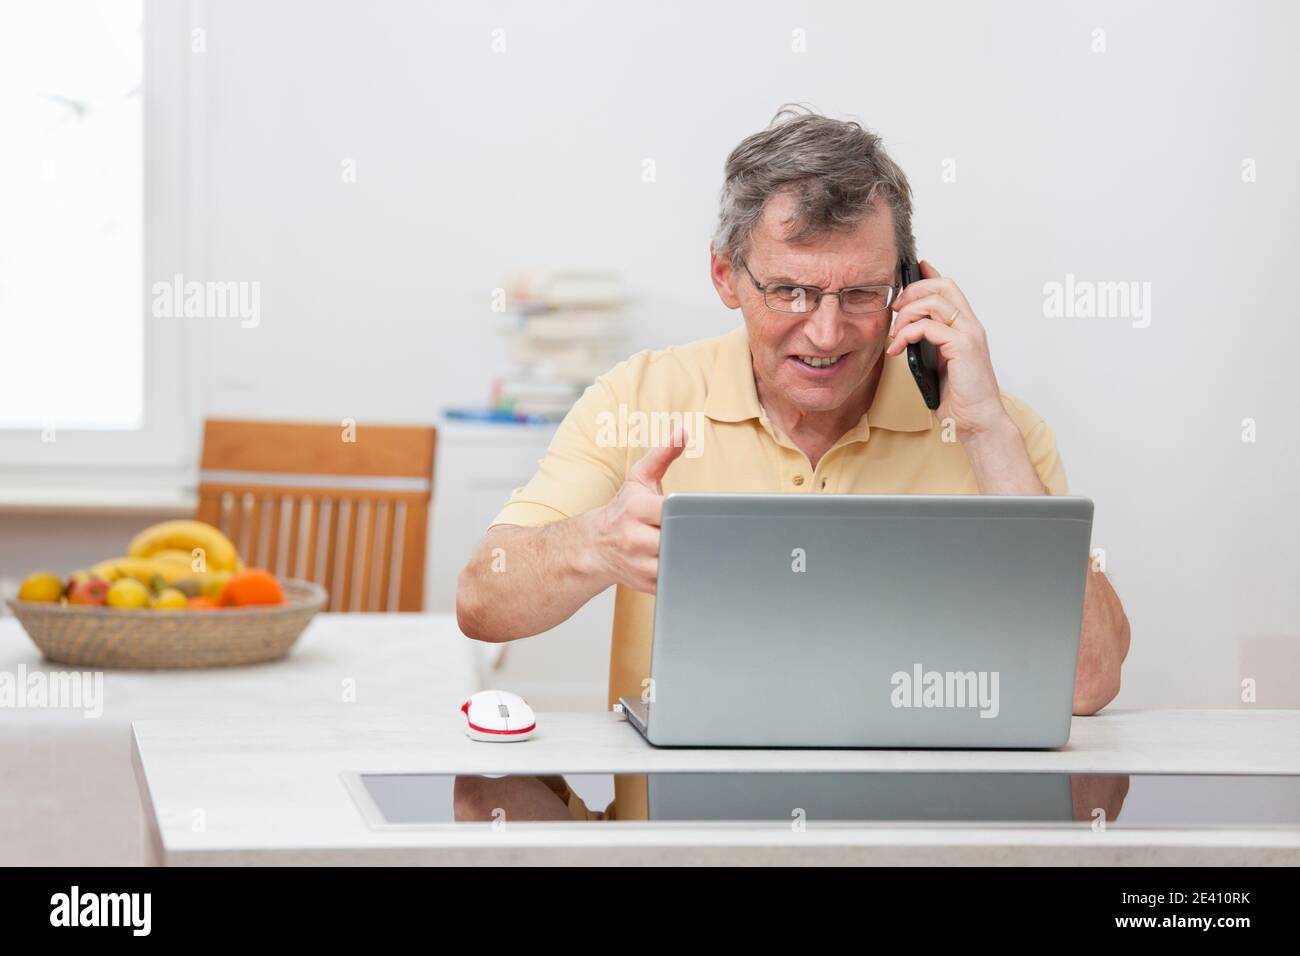 Annoyed mature man having problems while working from home with computer or internet - focus on the face Stock Photo